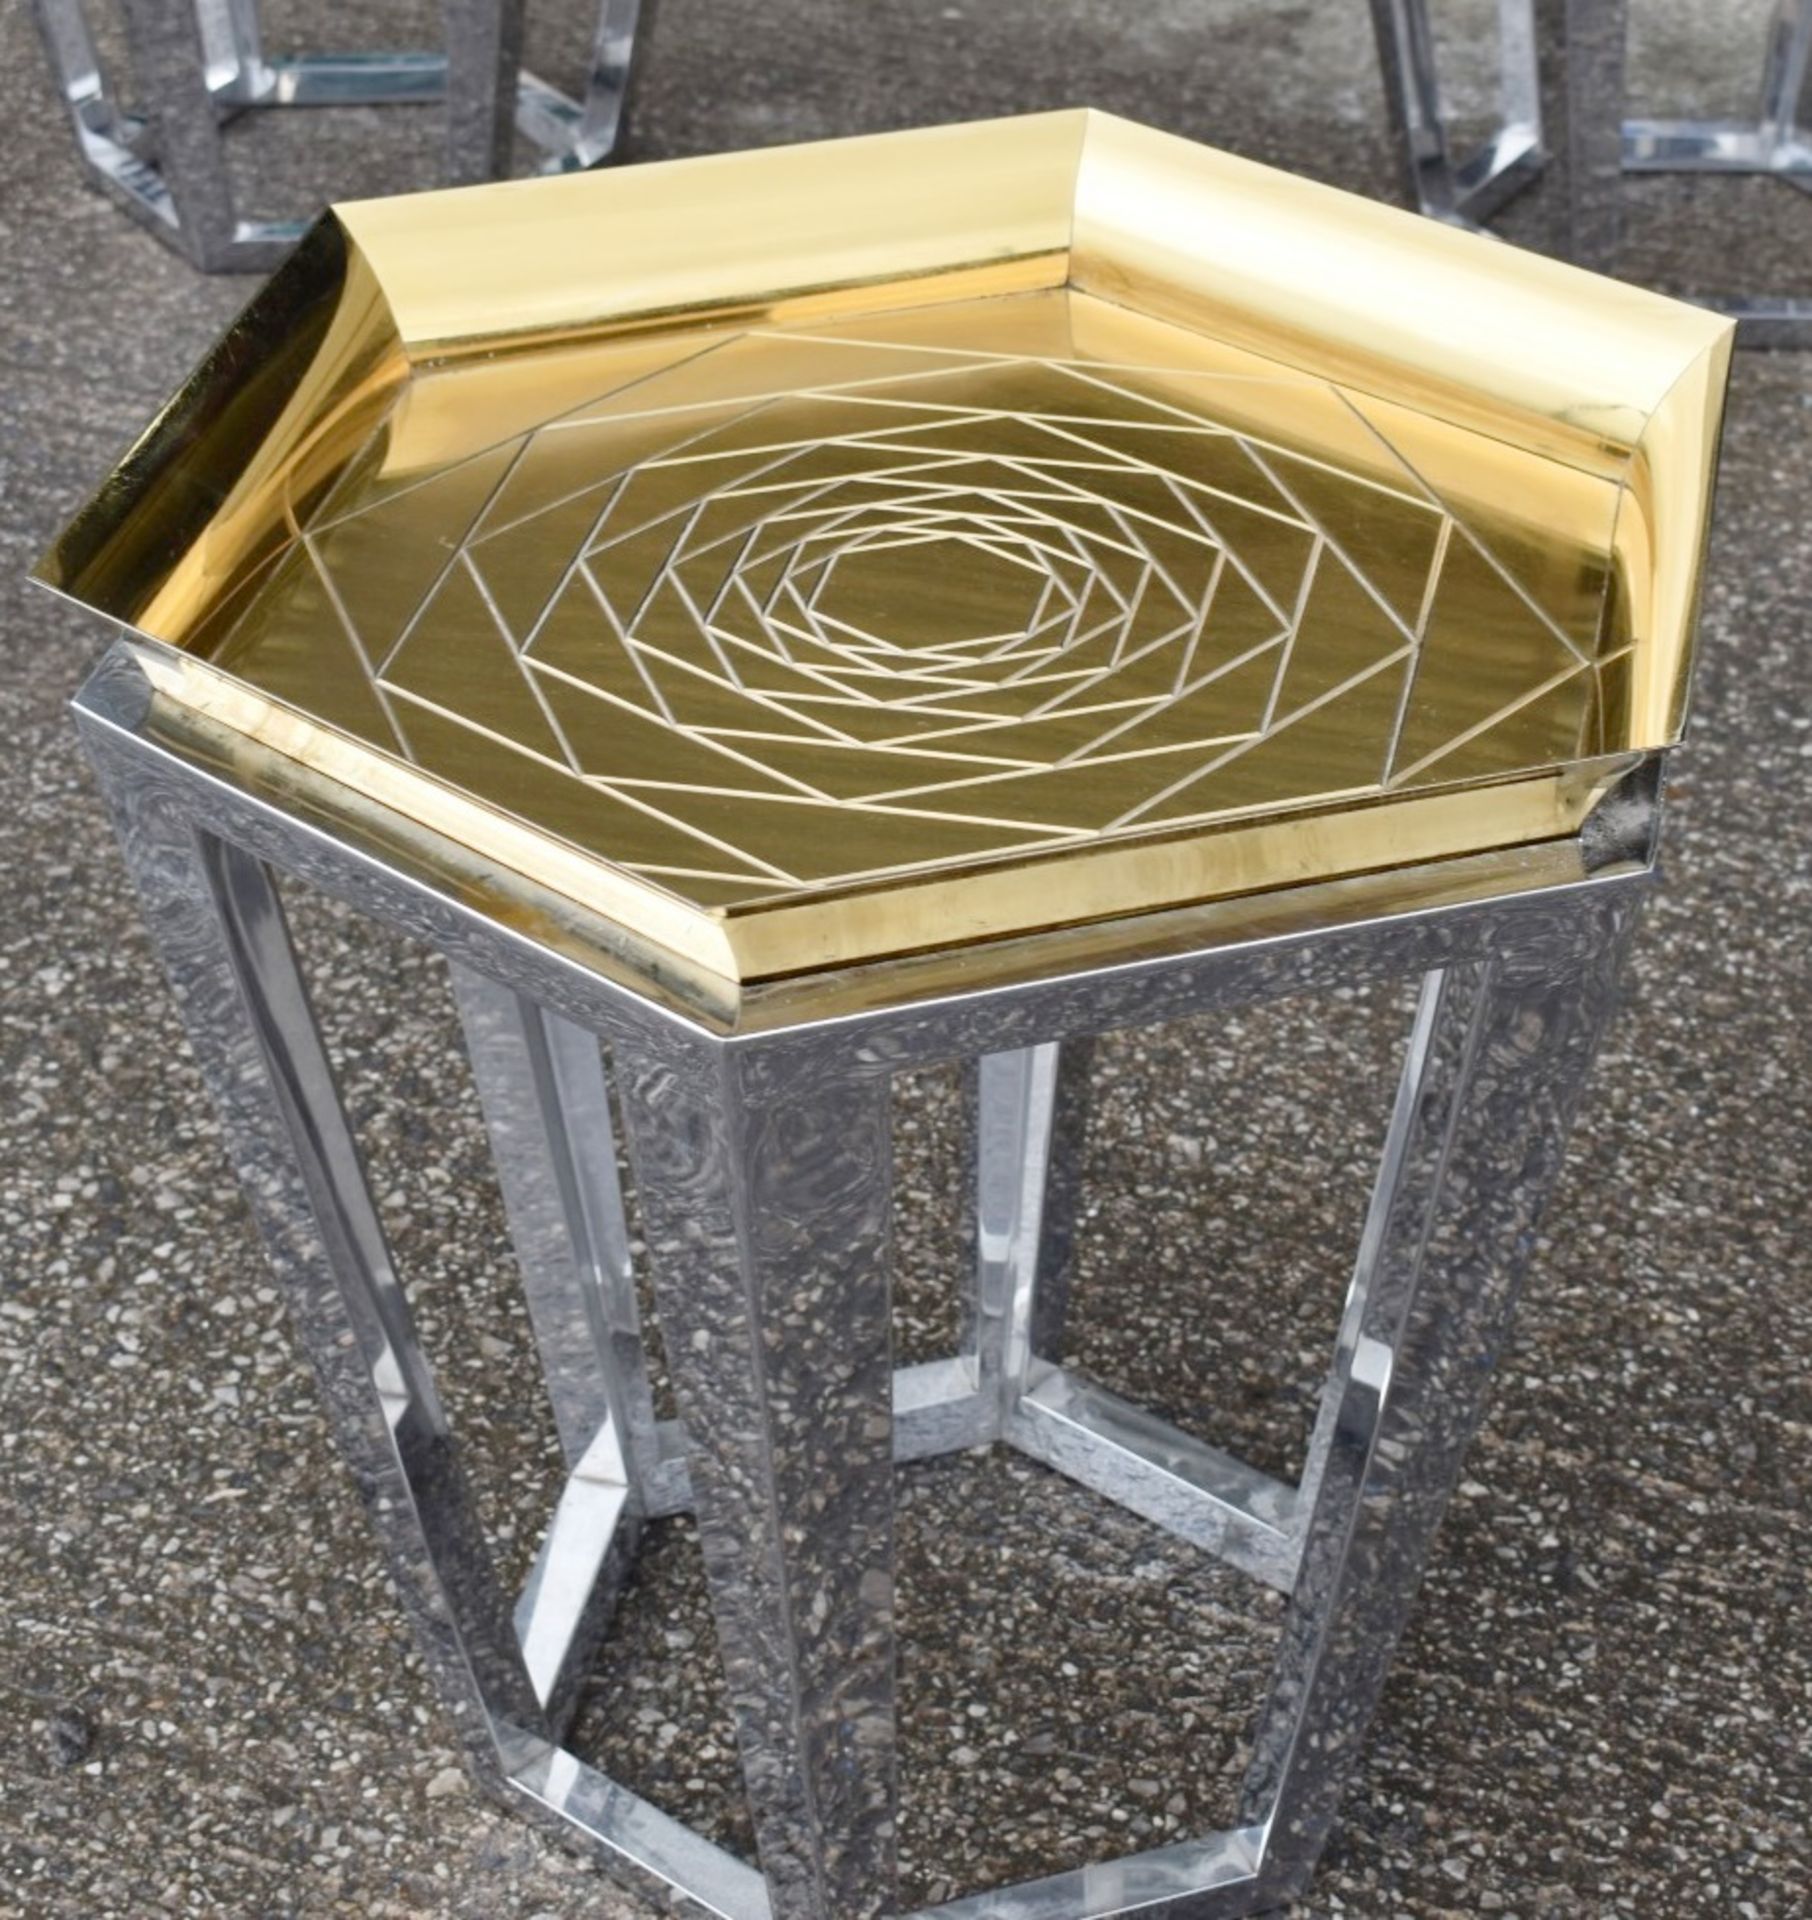 1 x Contemporary Designer Metal Table Featuring a Removable Tray Top with Geometric Rose Design, - Image 5 of 7